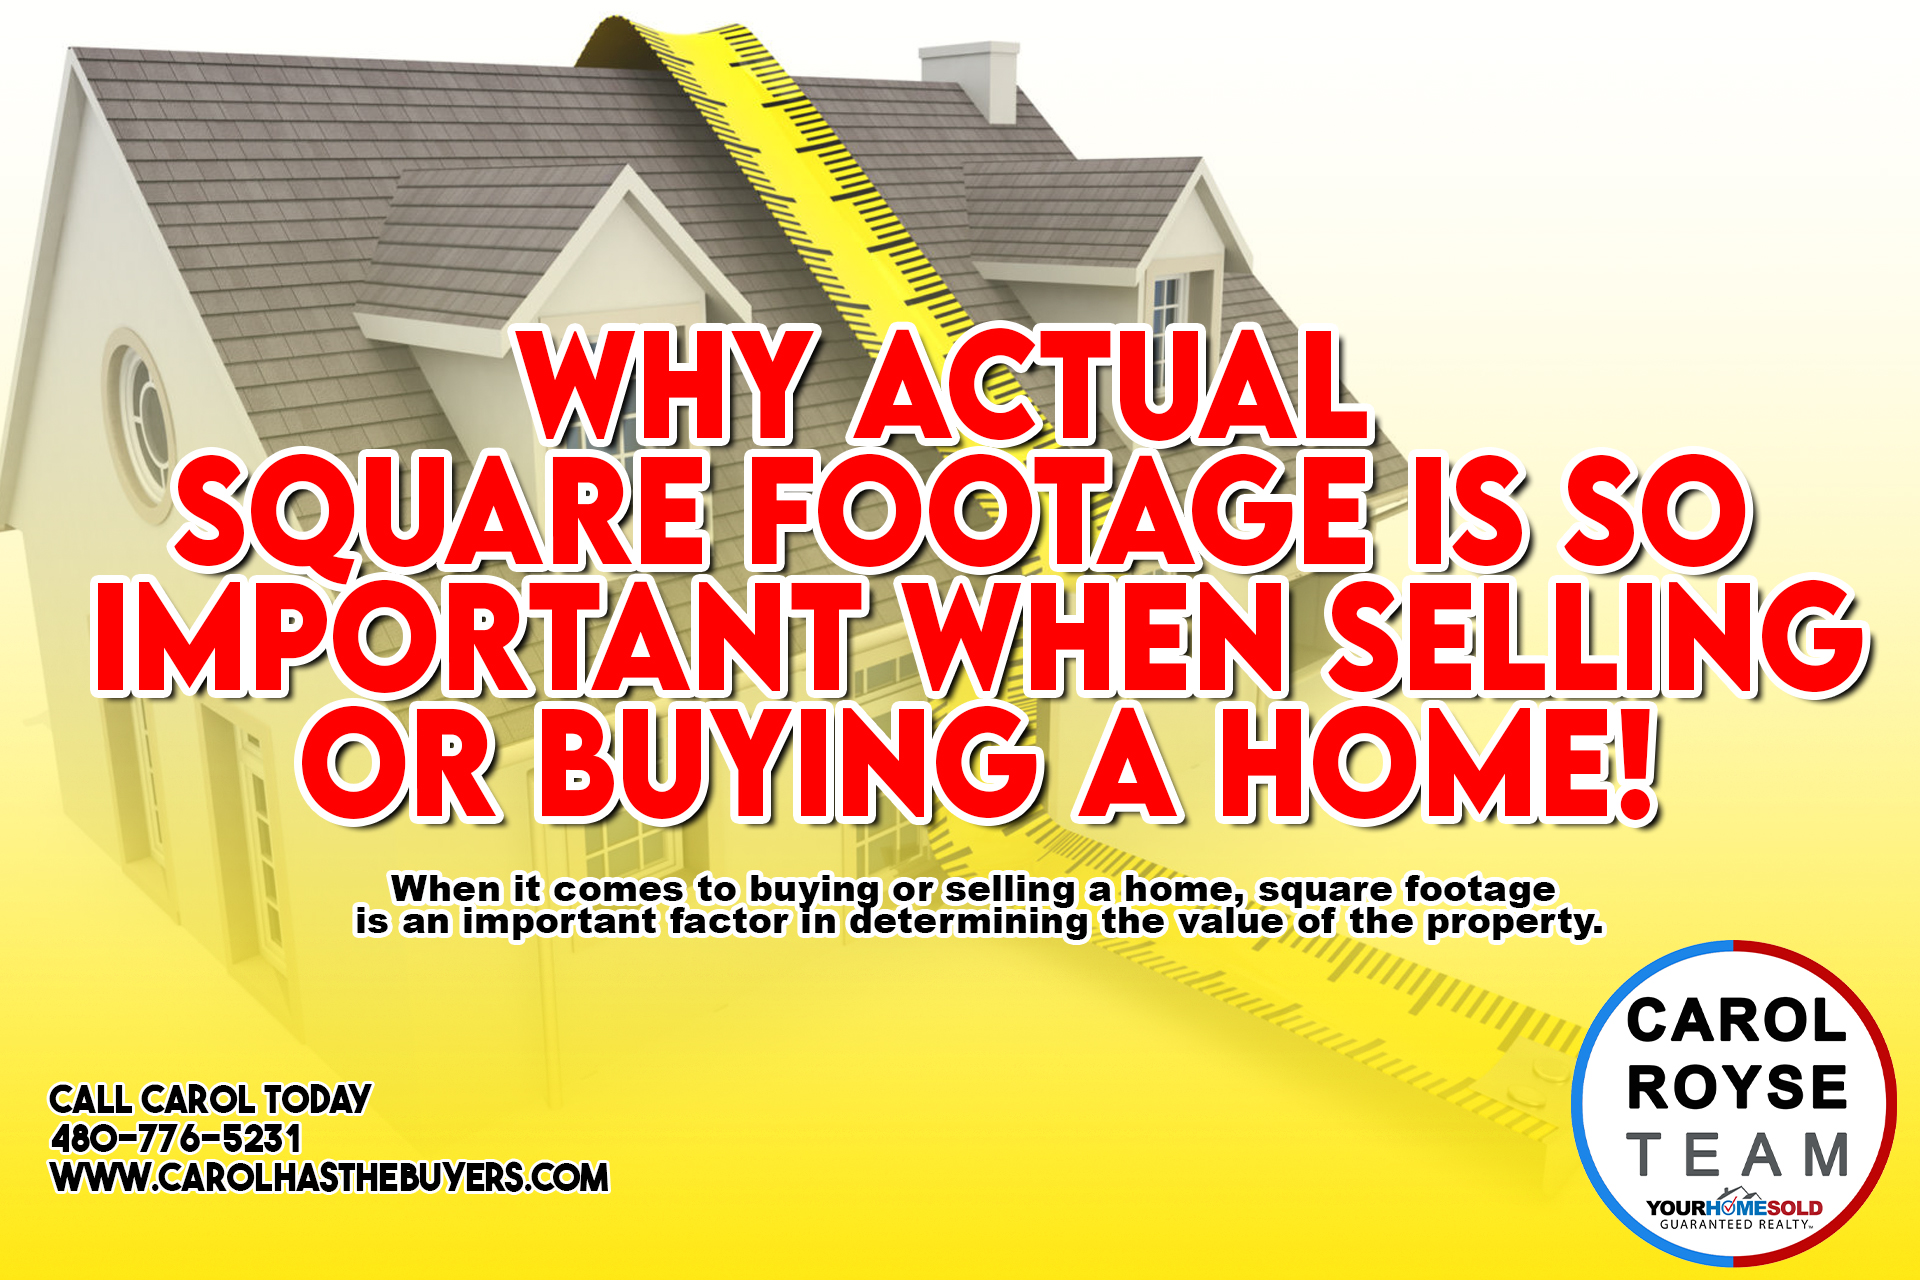 Why Actual Square Footage is so Important when Selling or Buying a Home!